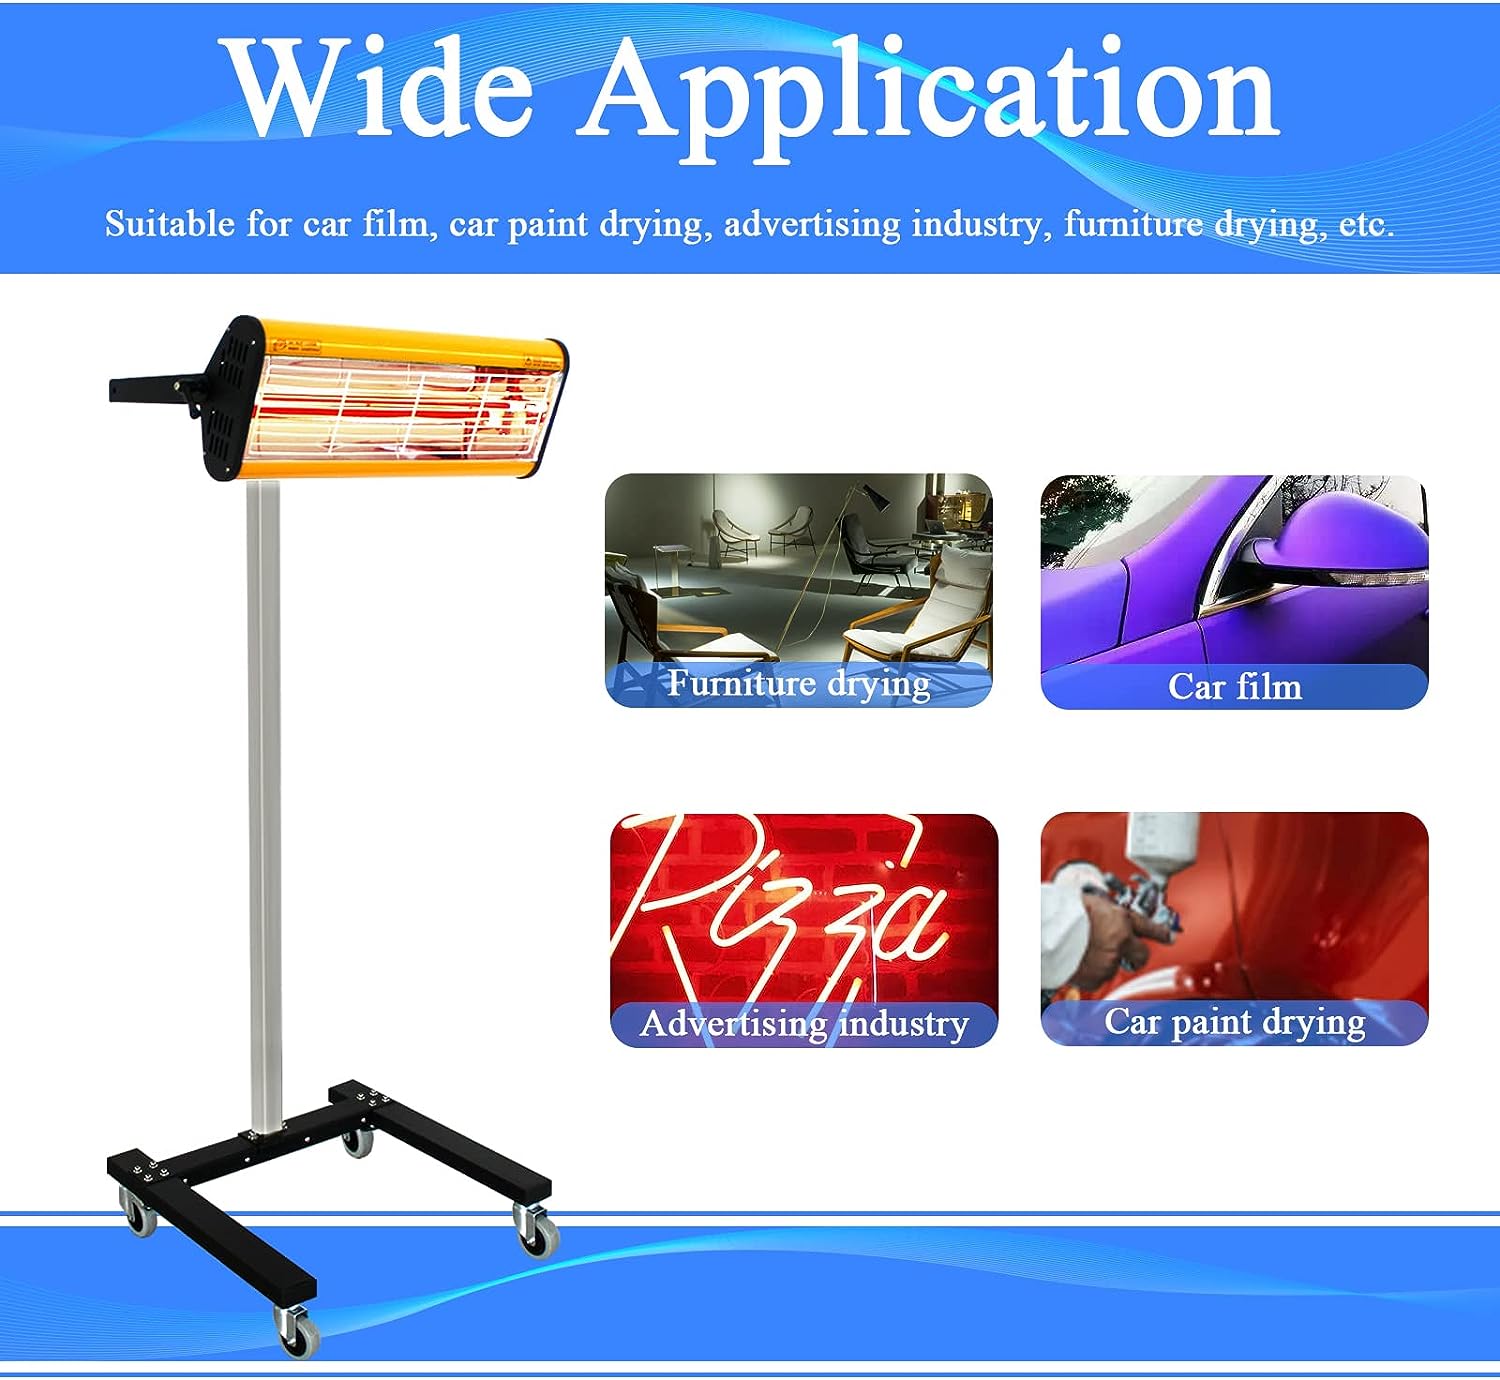 Solary Electricals PS218 Rotatable Automotive Spray Painting Stand for